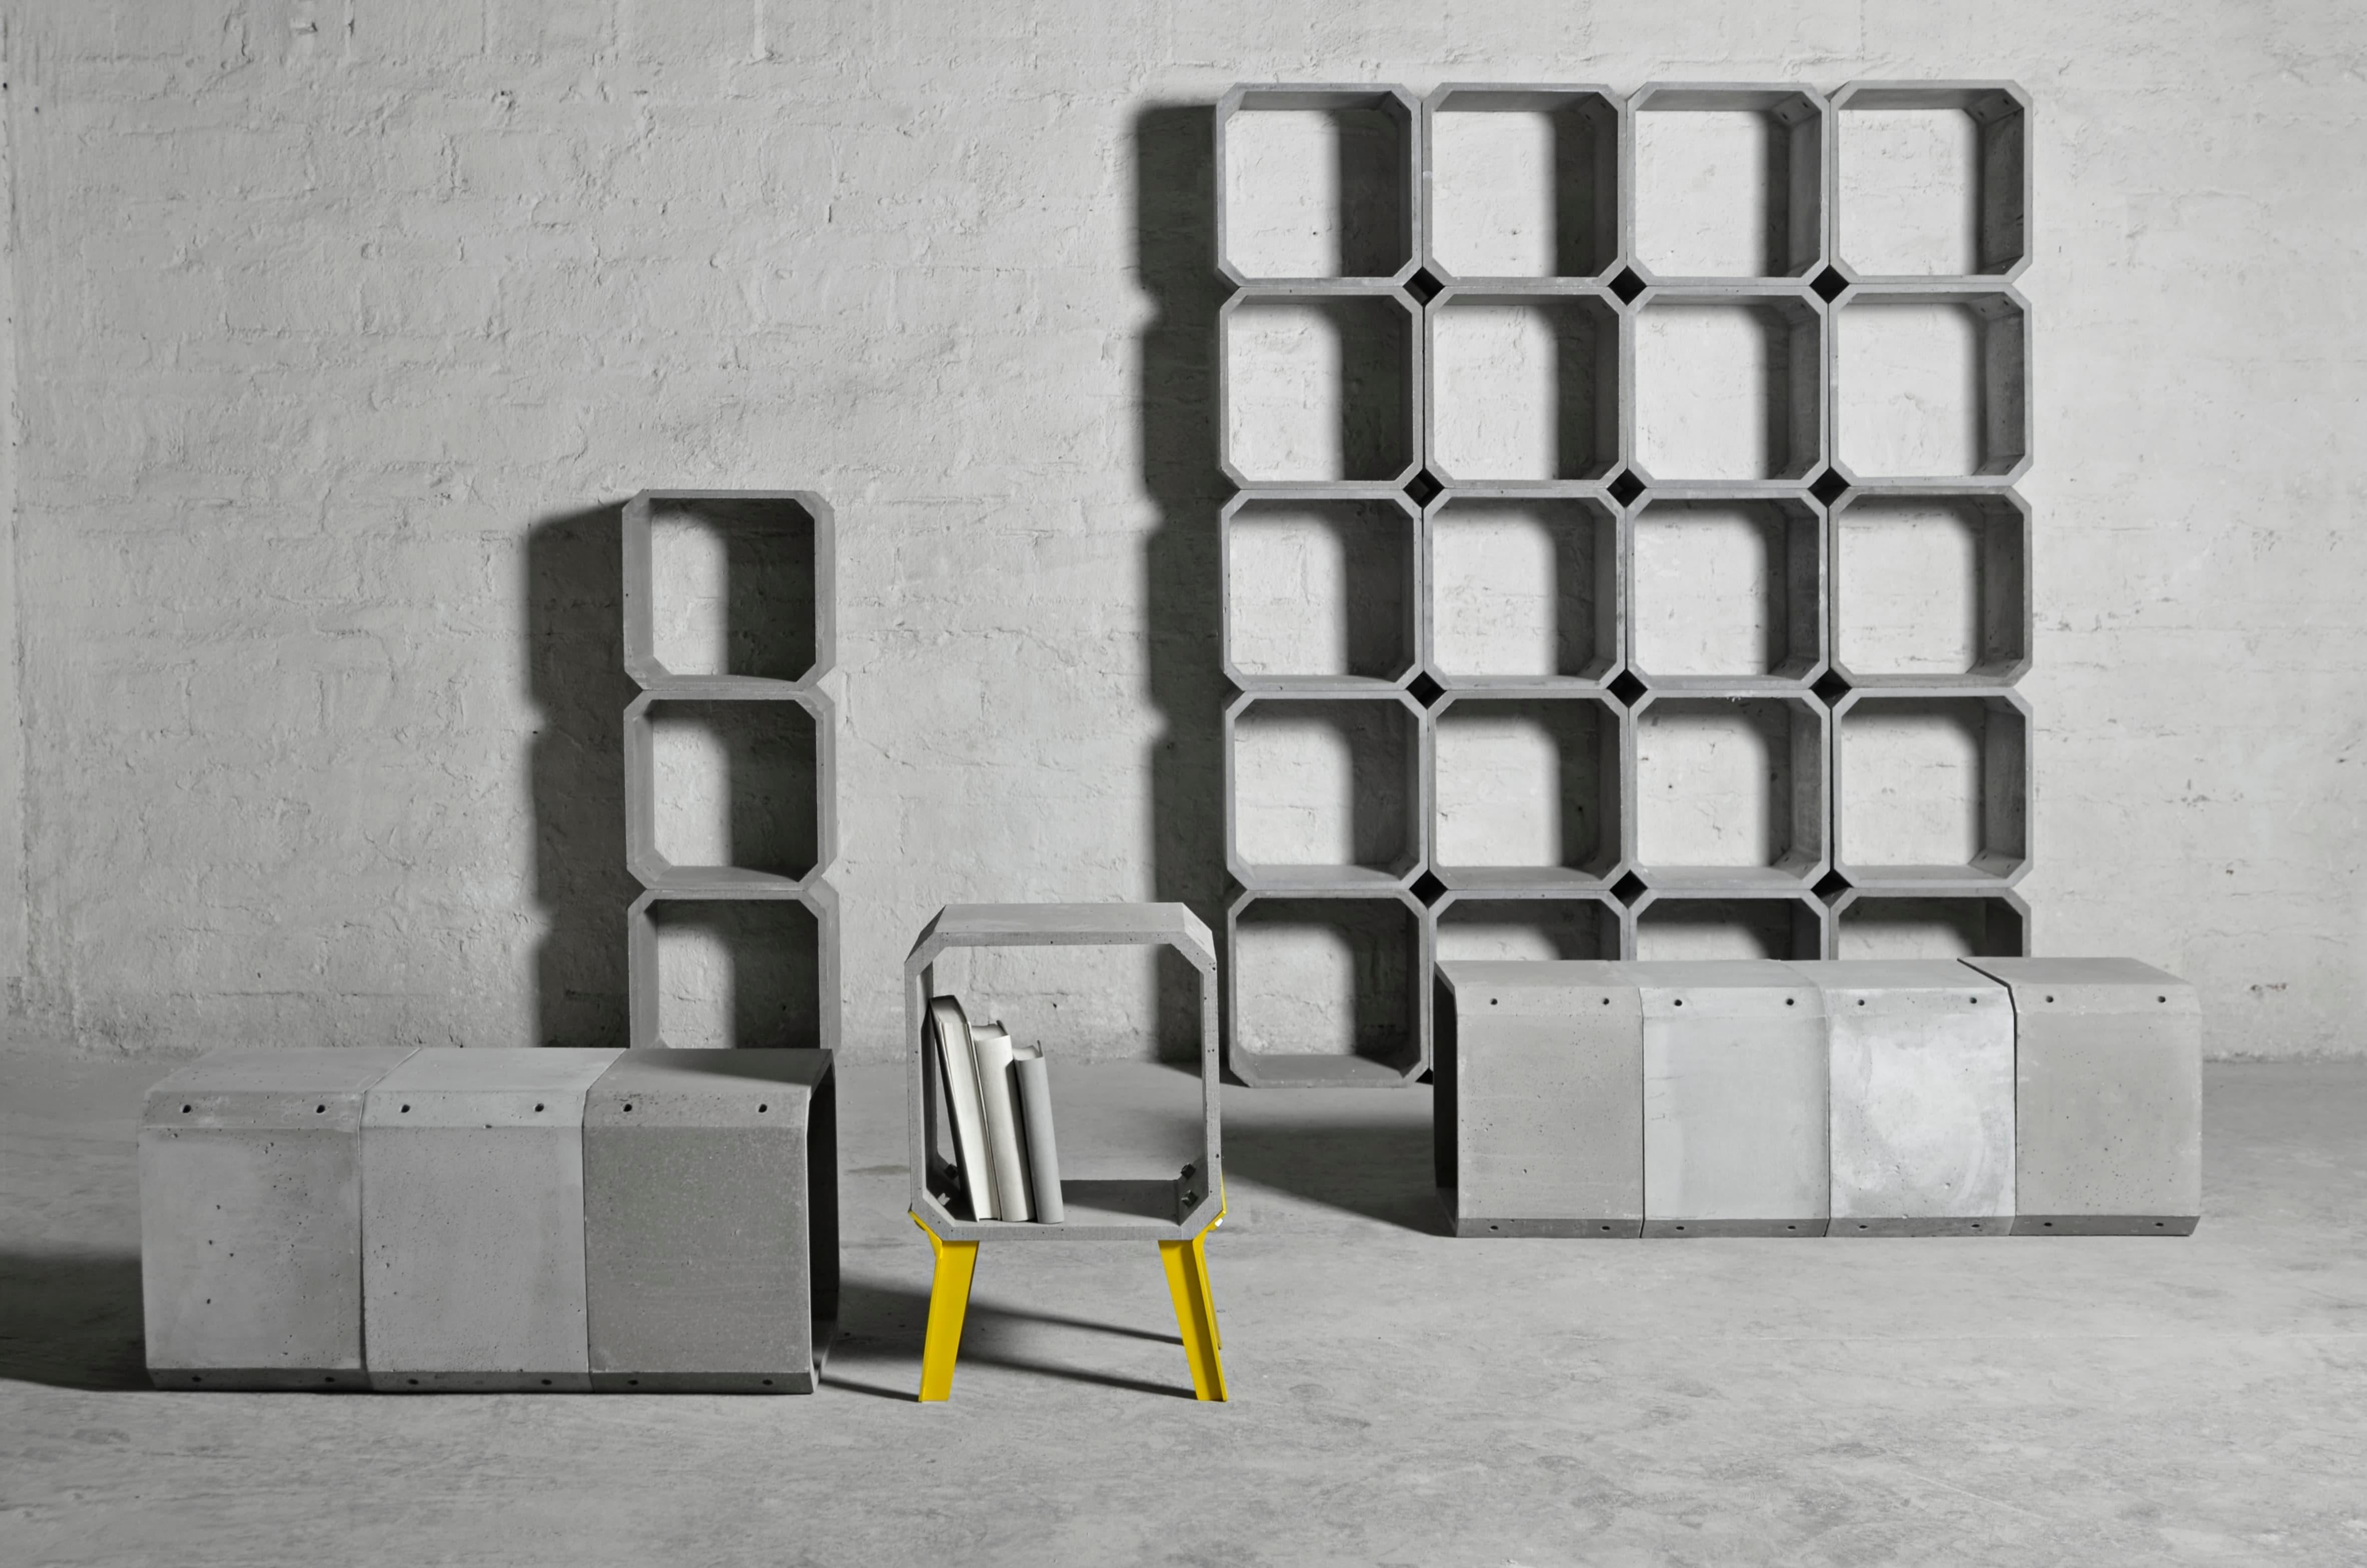 'KOU' is a modular storage made of concrete
by Bentu Design

[Blocks sold individually]

Dimension of one block: 36 x 36 x 26cm

Bentu Design's furniture derives its uniqueness from the simplicity of its forms and its materials. Designed and